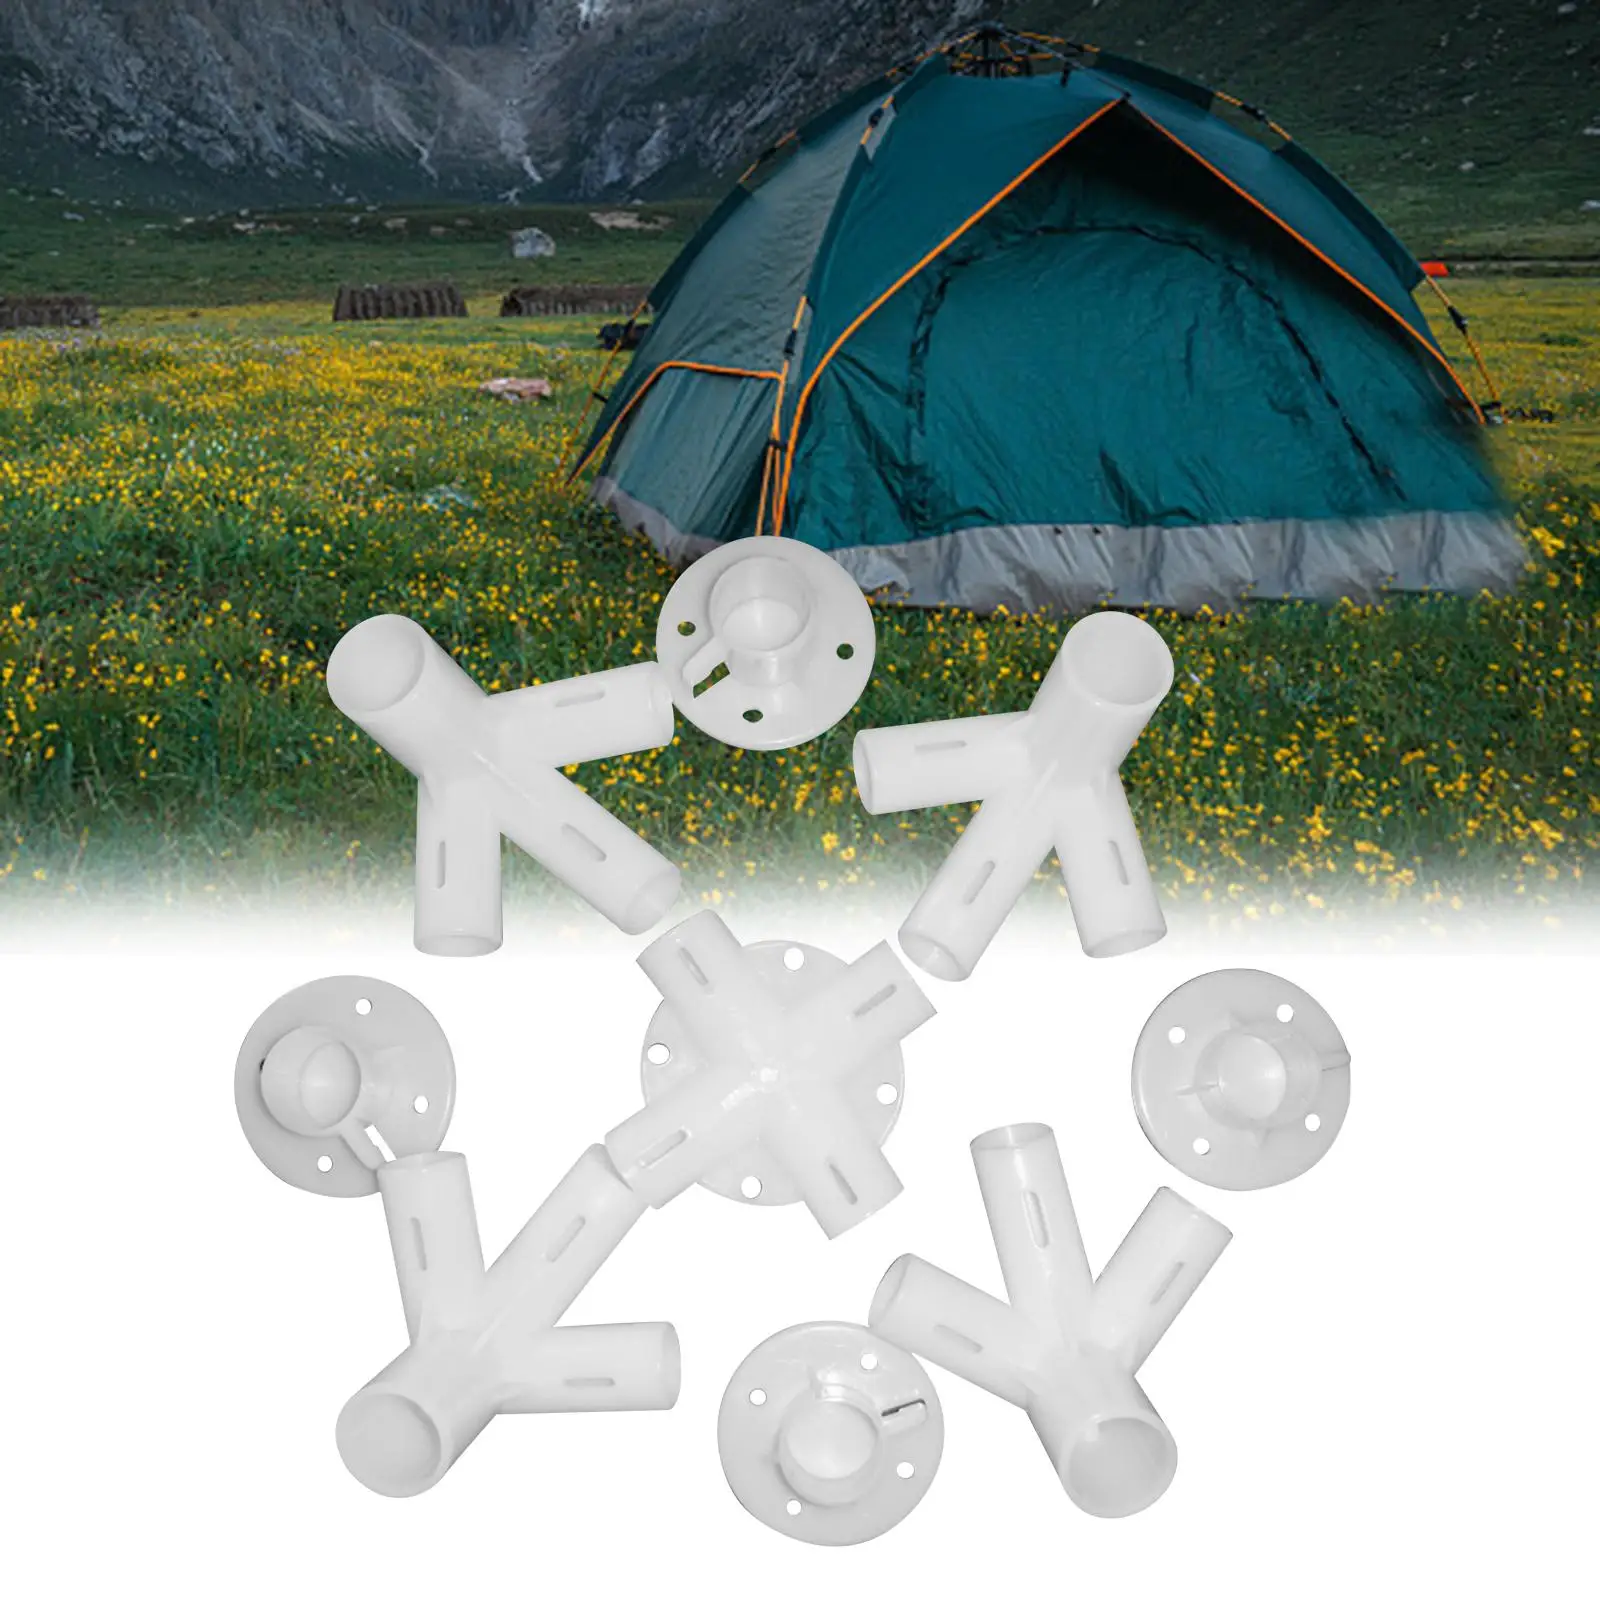 1 Set Spare Parts Feet Corner Connector Accessories for Outdoor Backpacking Trip